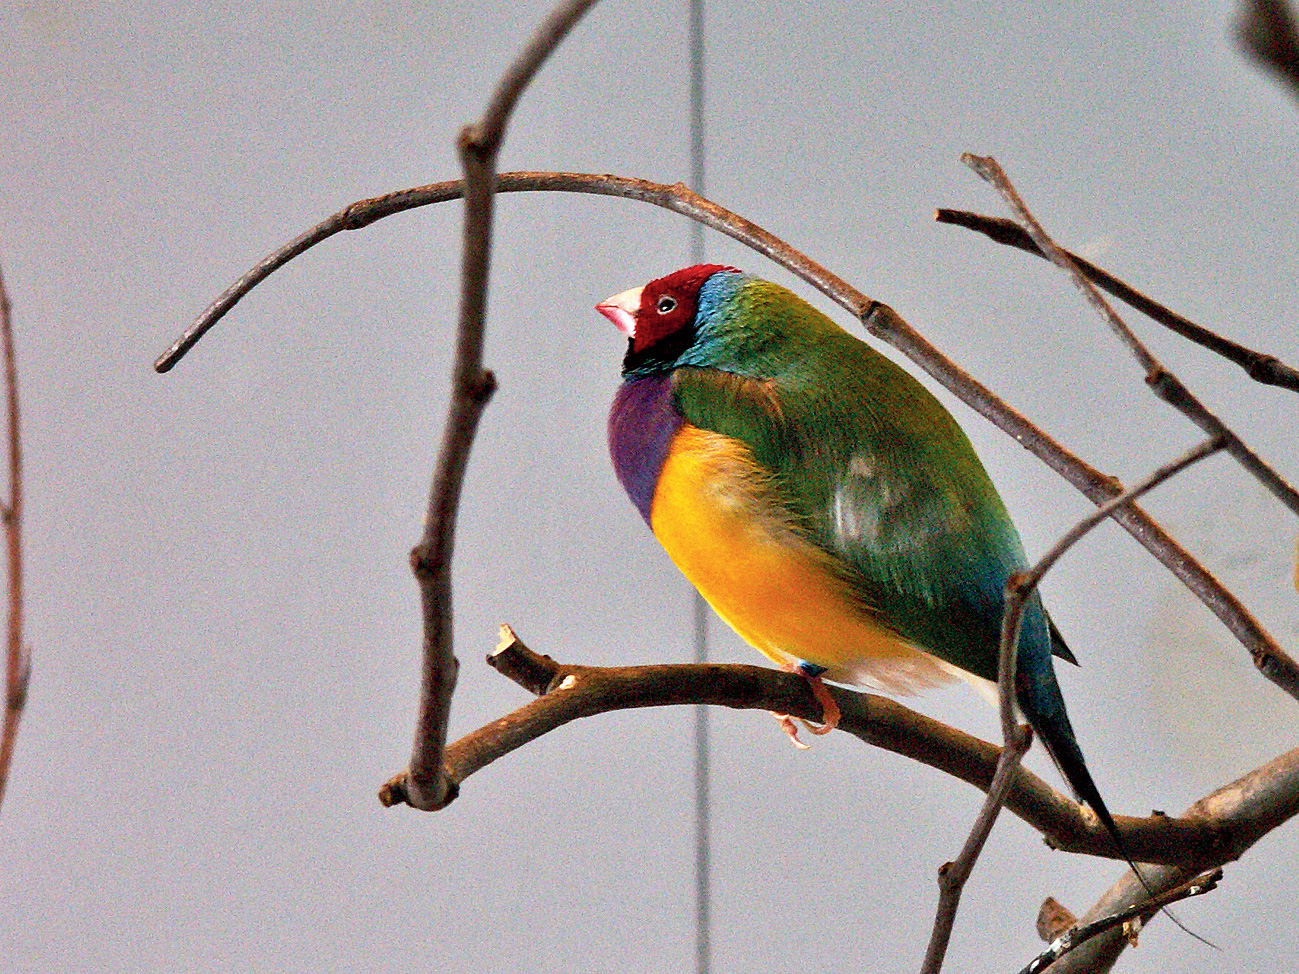 A Gouldian Finch, native to Australia, was among the 53 birds that died in Alipore zoo